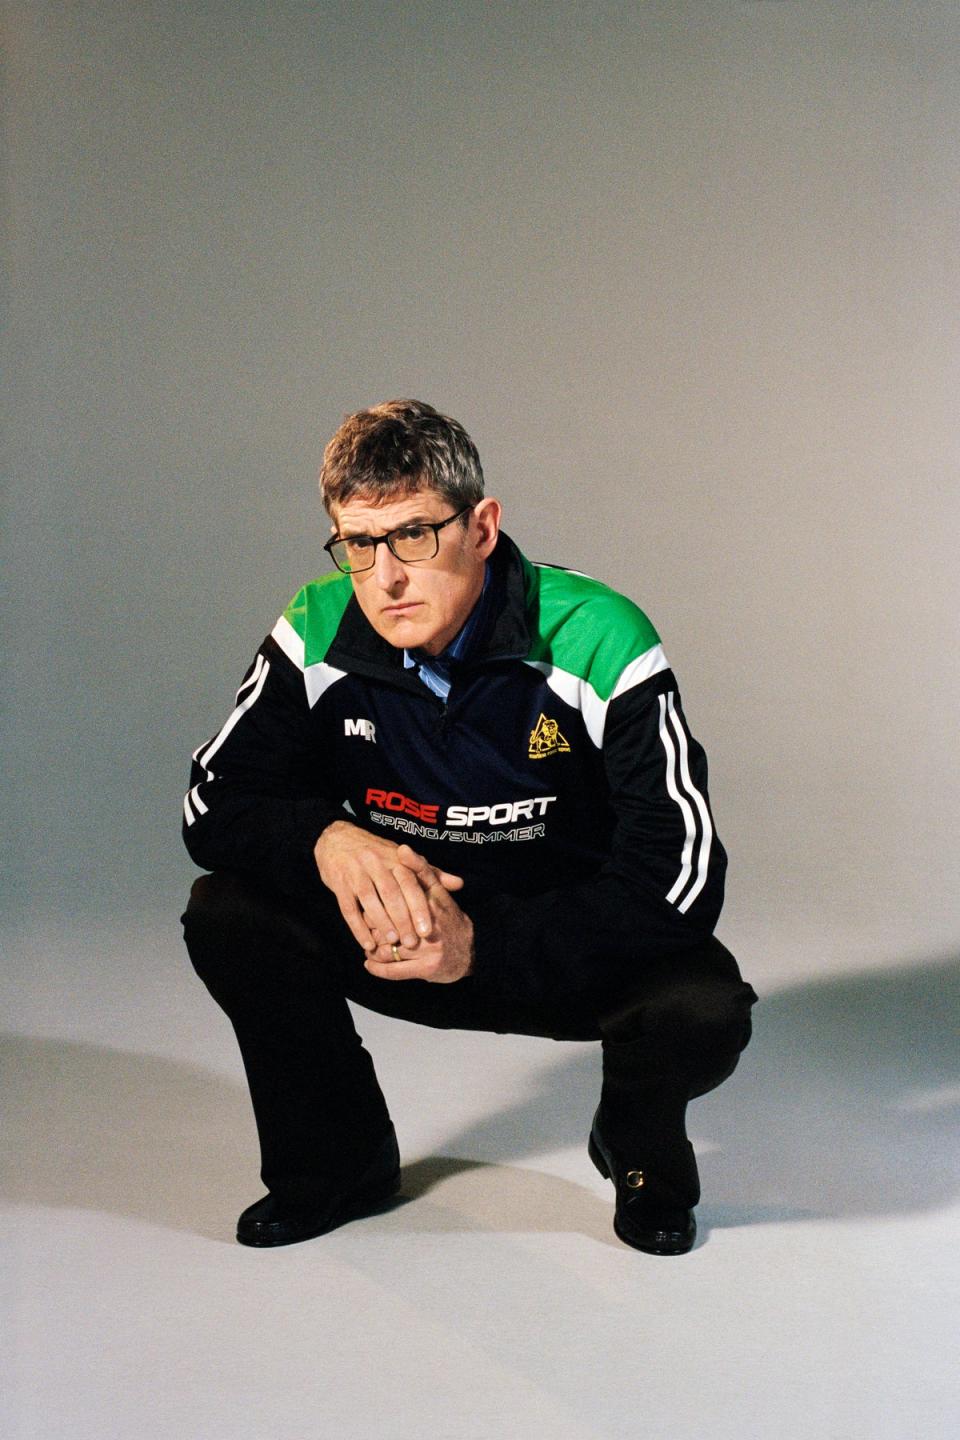 Louis Theroux photographed by Camille Vivier for ES Magazine. Jacket by Martine Rose, shirt by Paul Smith, Trousers from Our Legacy at matches.com, shoes by Horatio footwear (Camille Vivier for ES Magazine)